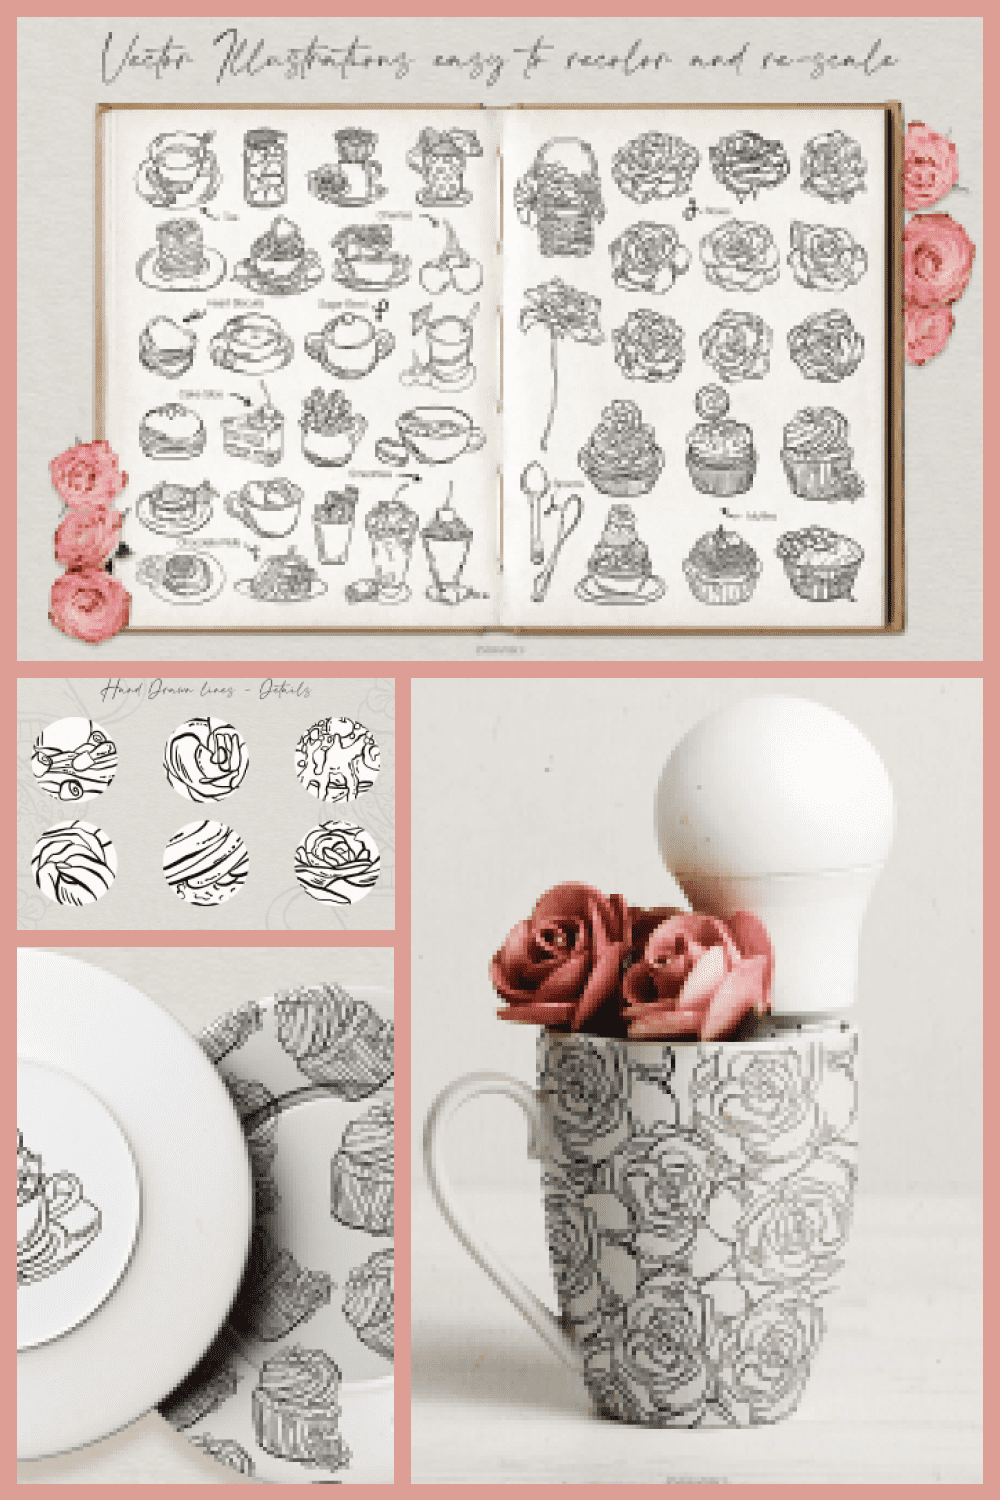 Muffins, Sweets and Roses Vector Illustrations - MasterBundles - Pinterest Collage Image.